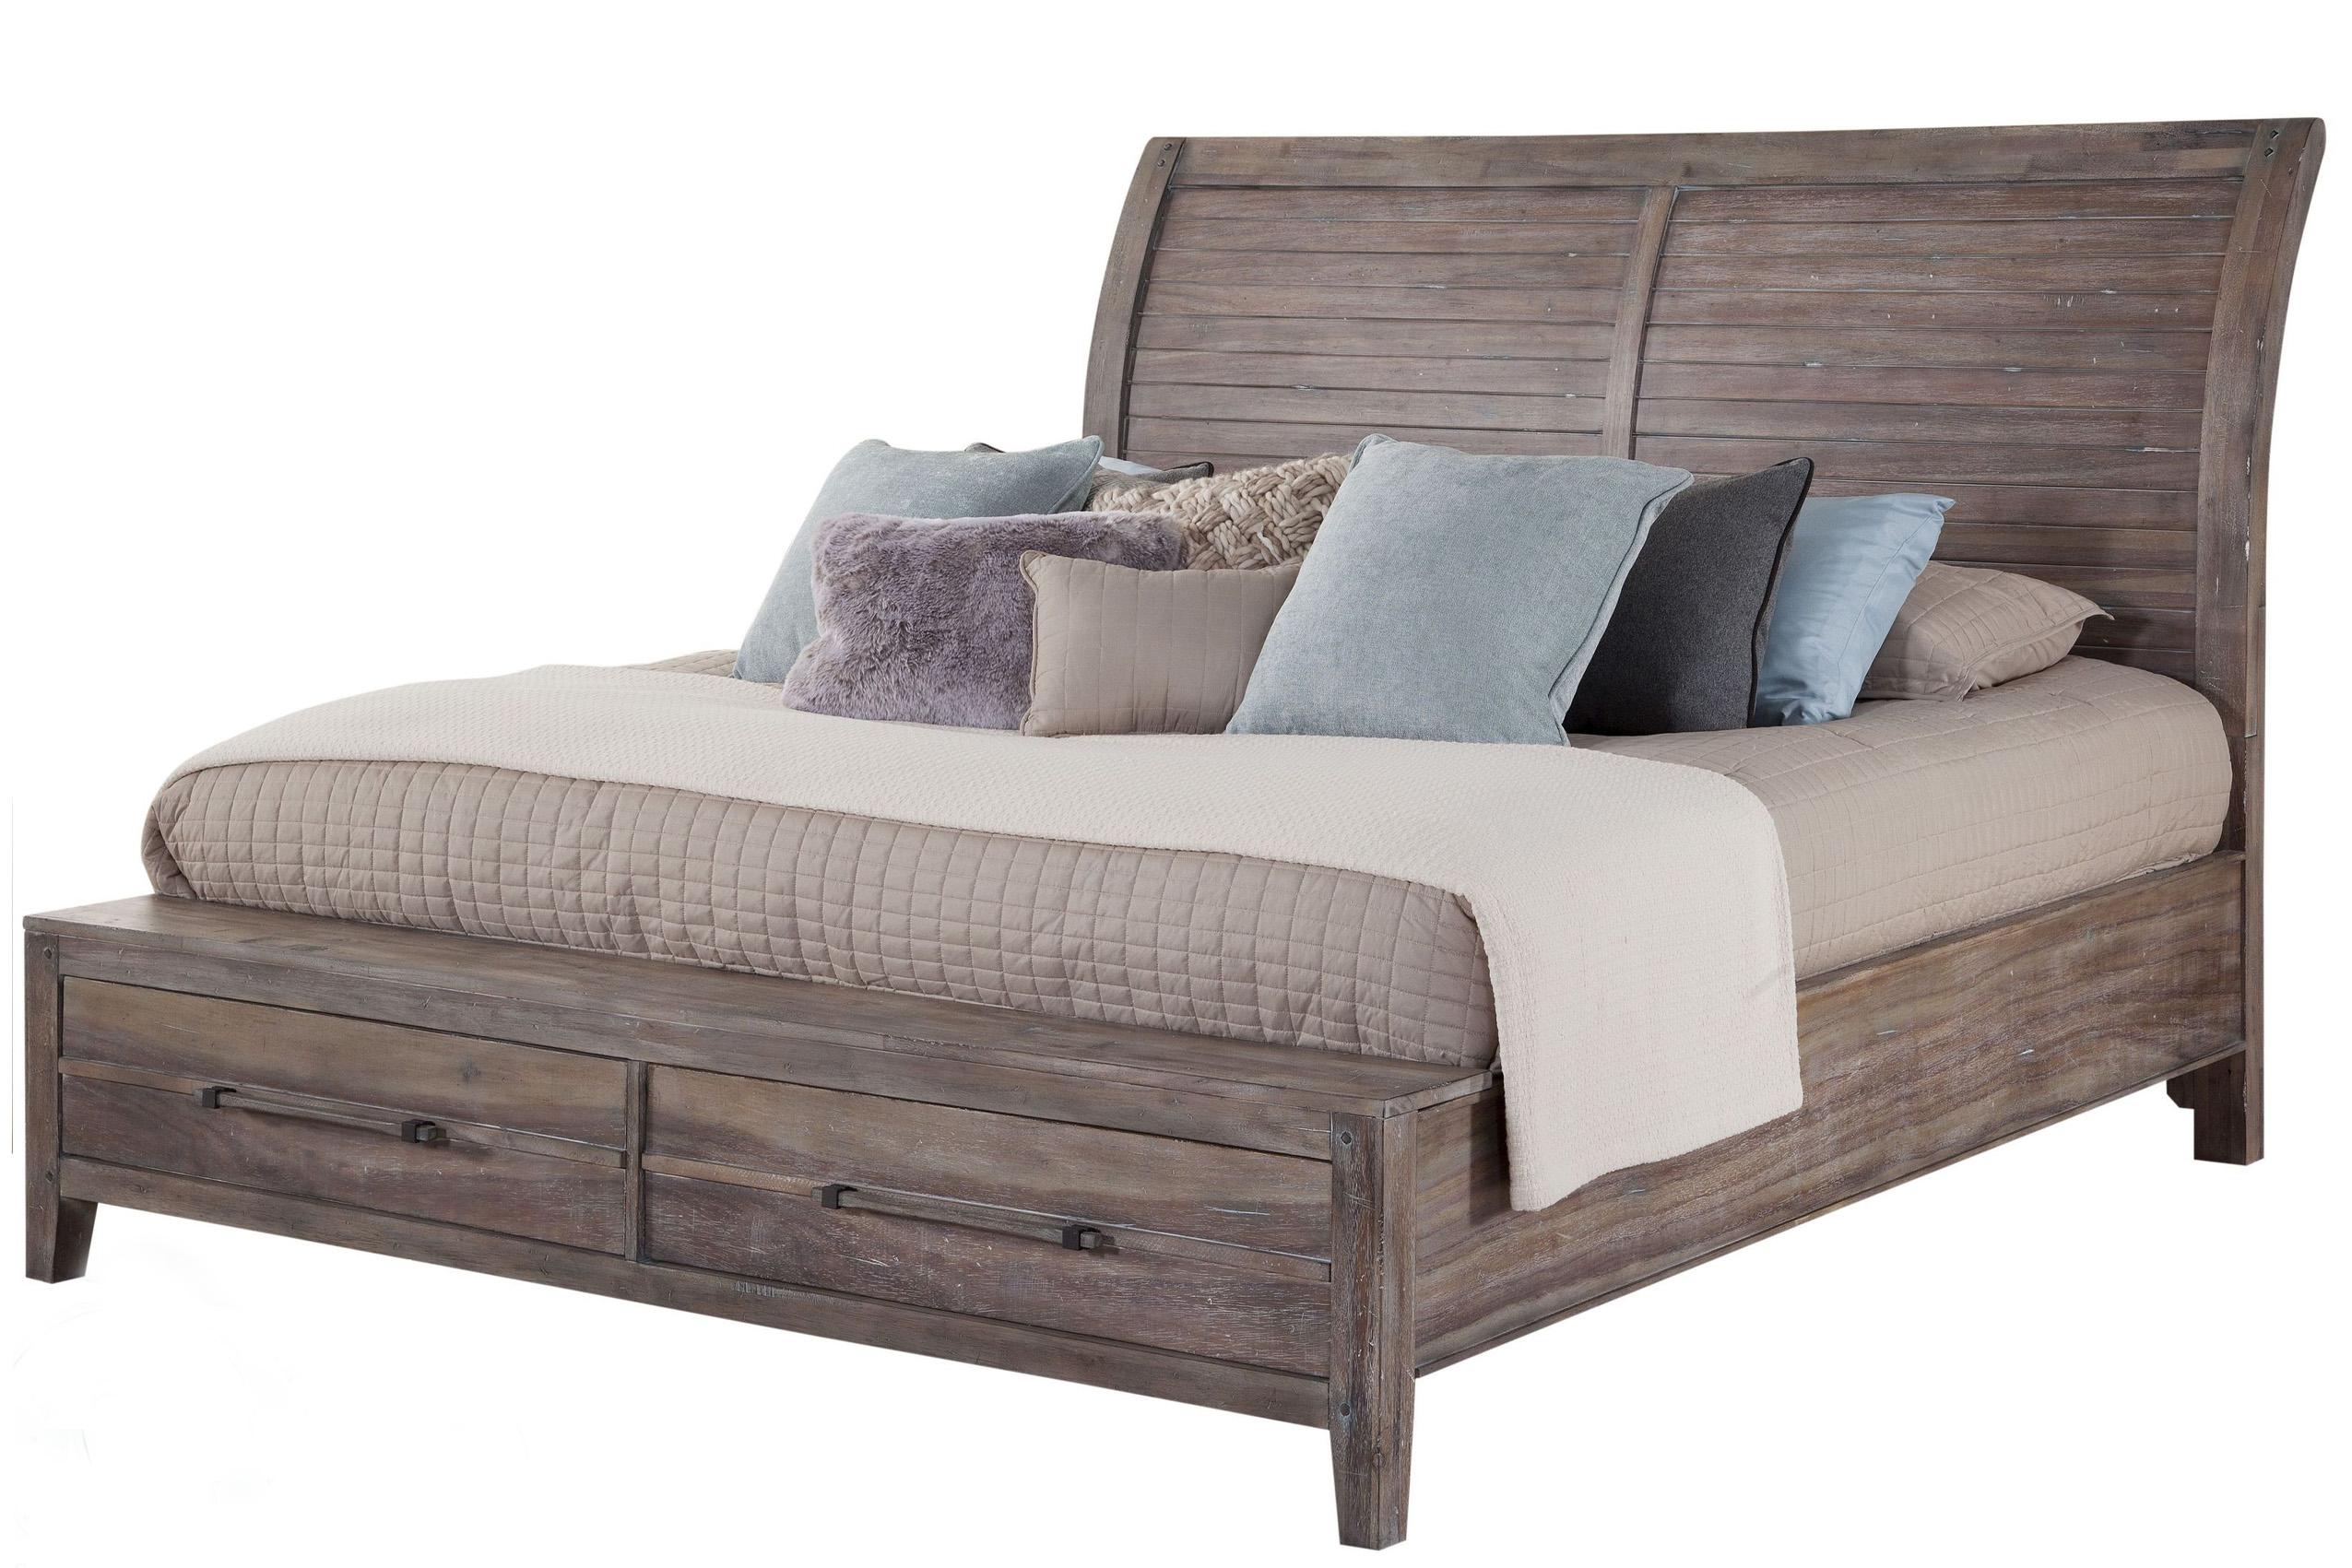 Classic, Traditional Sleigh Bed AURORA 2800-50SLES 2800-66SLST in Driftwood, Gray 